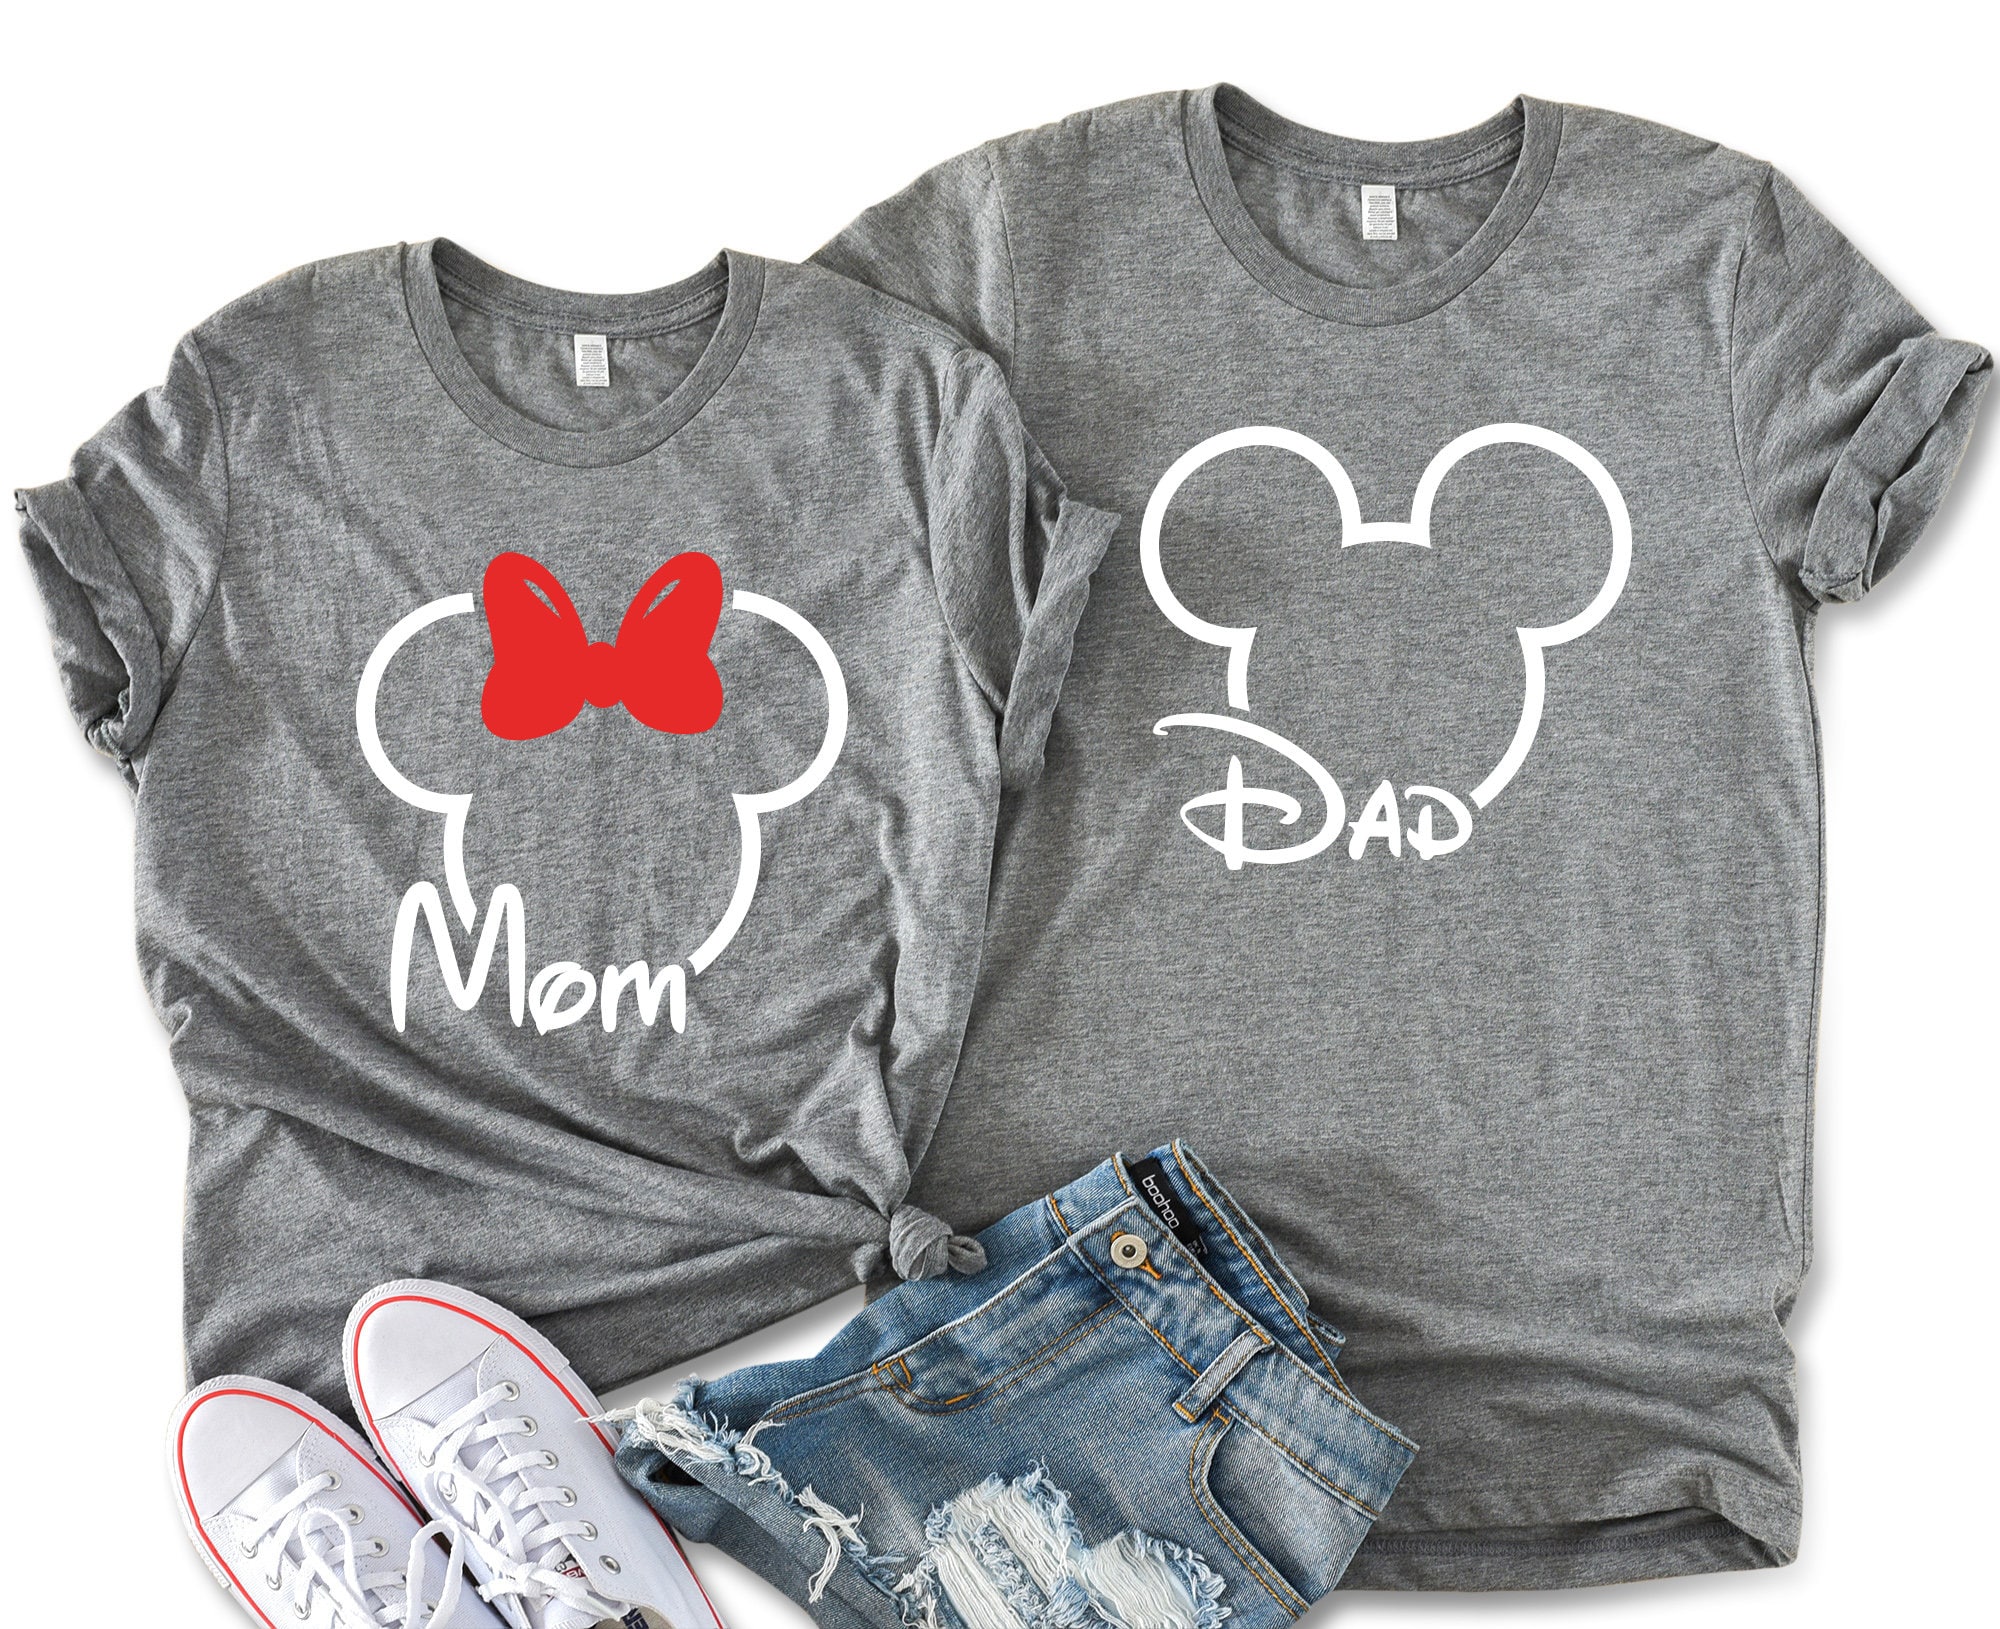 Mom Minnie & Dad Mickey Unisex T-shirts, Disney Parents Matching Couple Tees, Minnie and Mickey Matching Tees